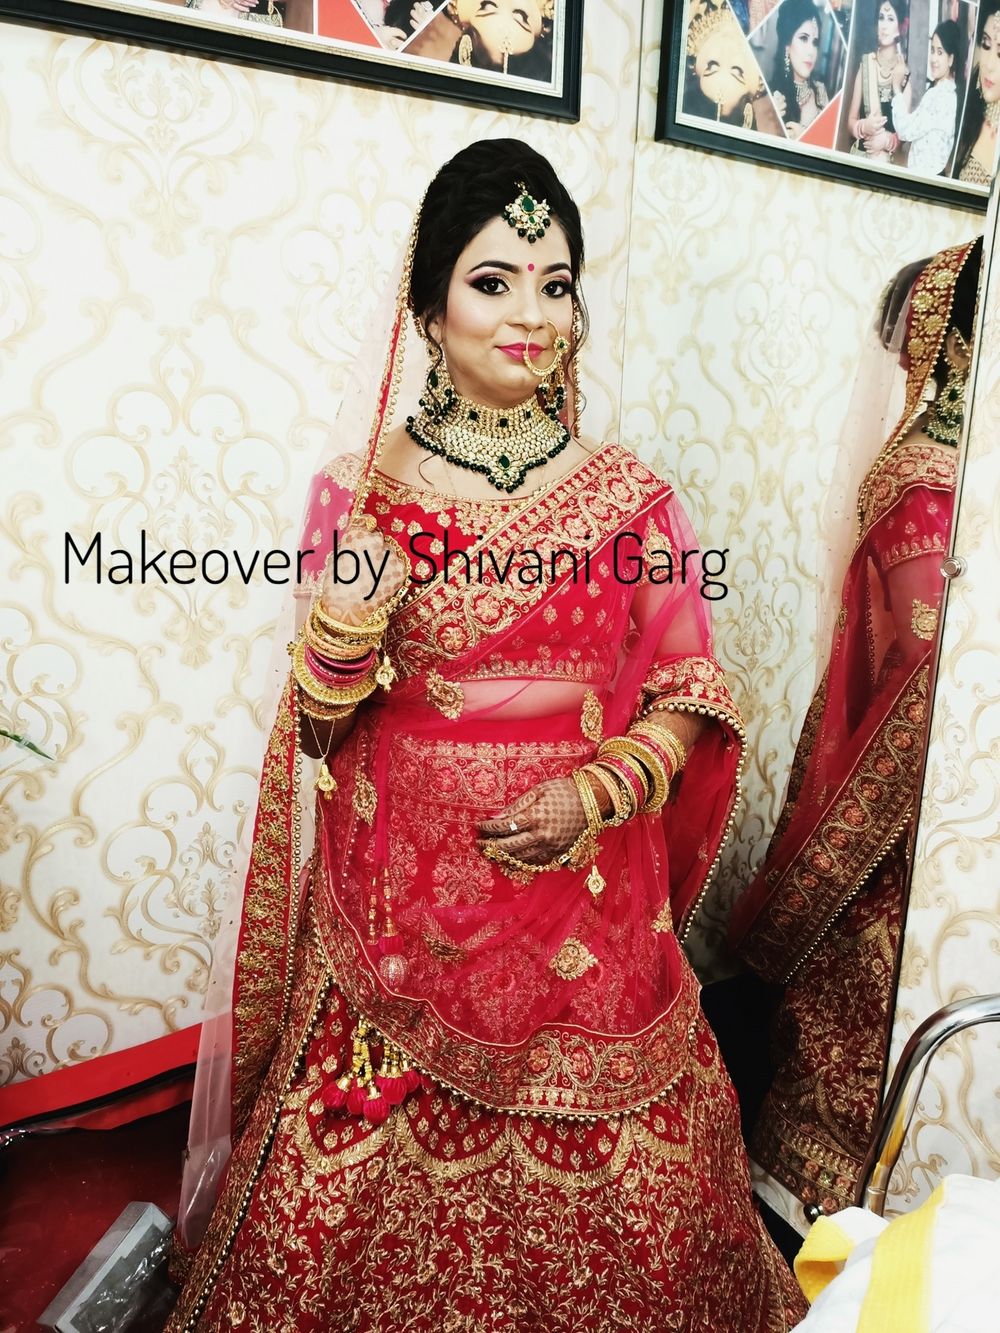 Photo From Bride of the Day - By Makeover by Shivani Garg